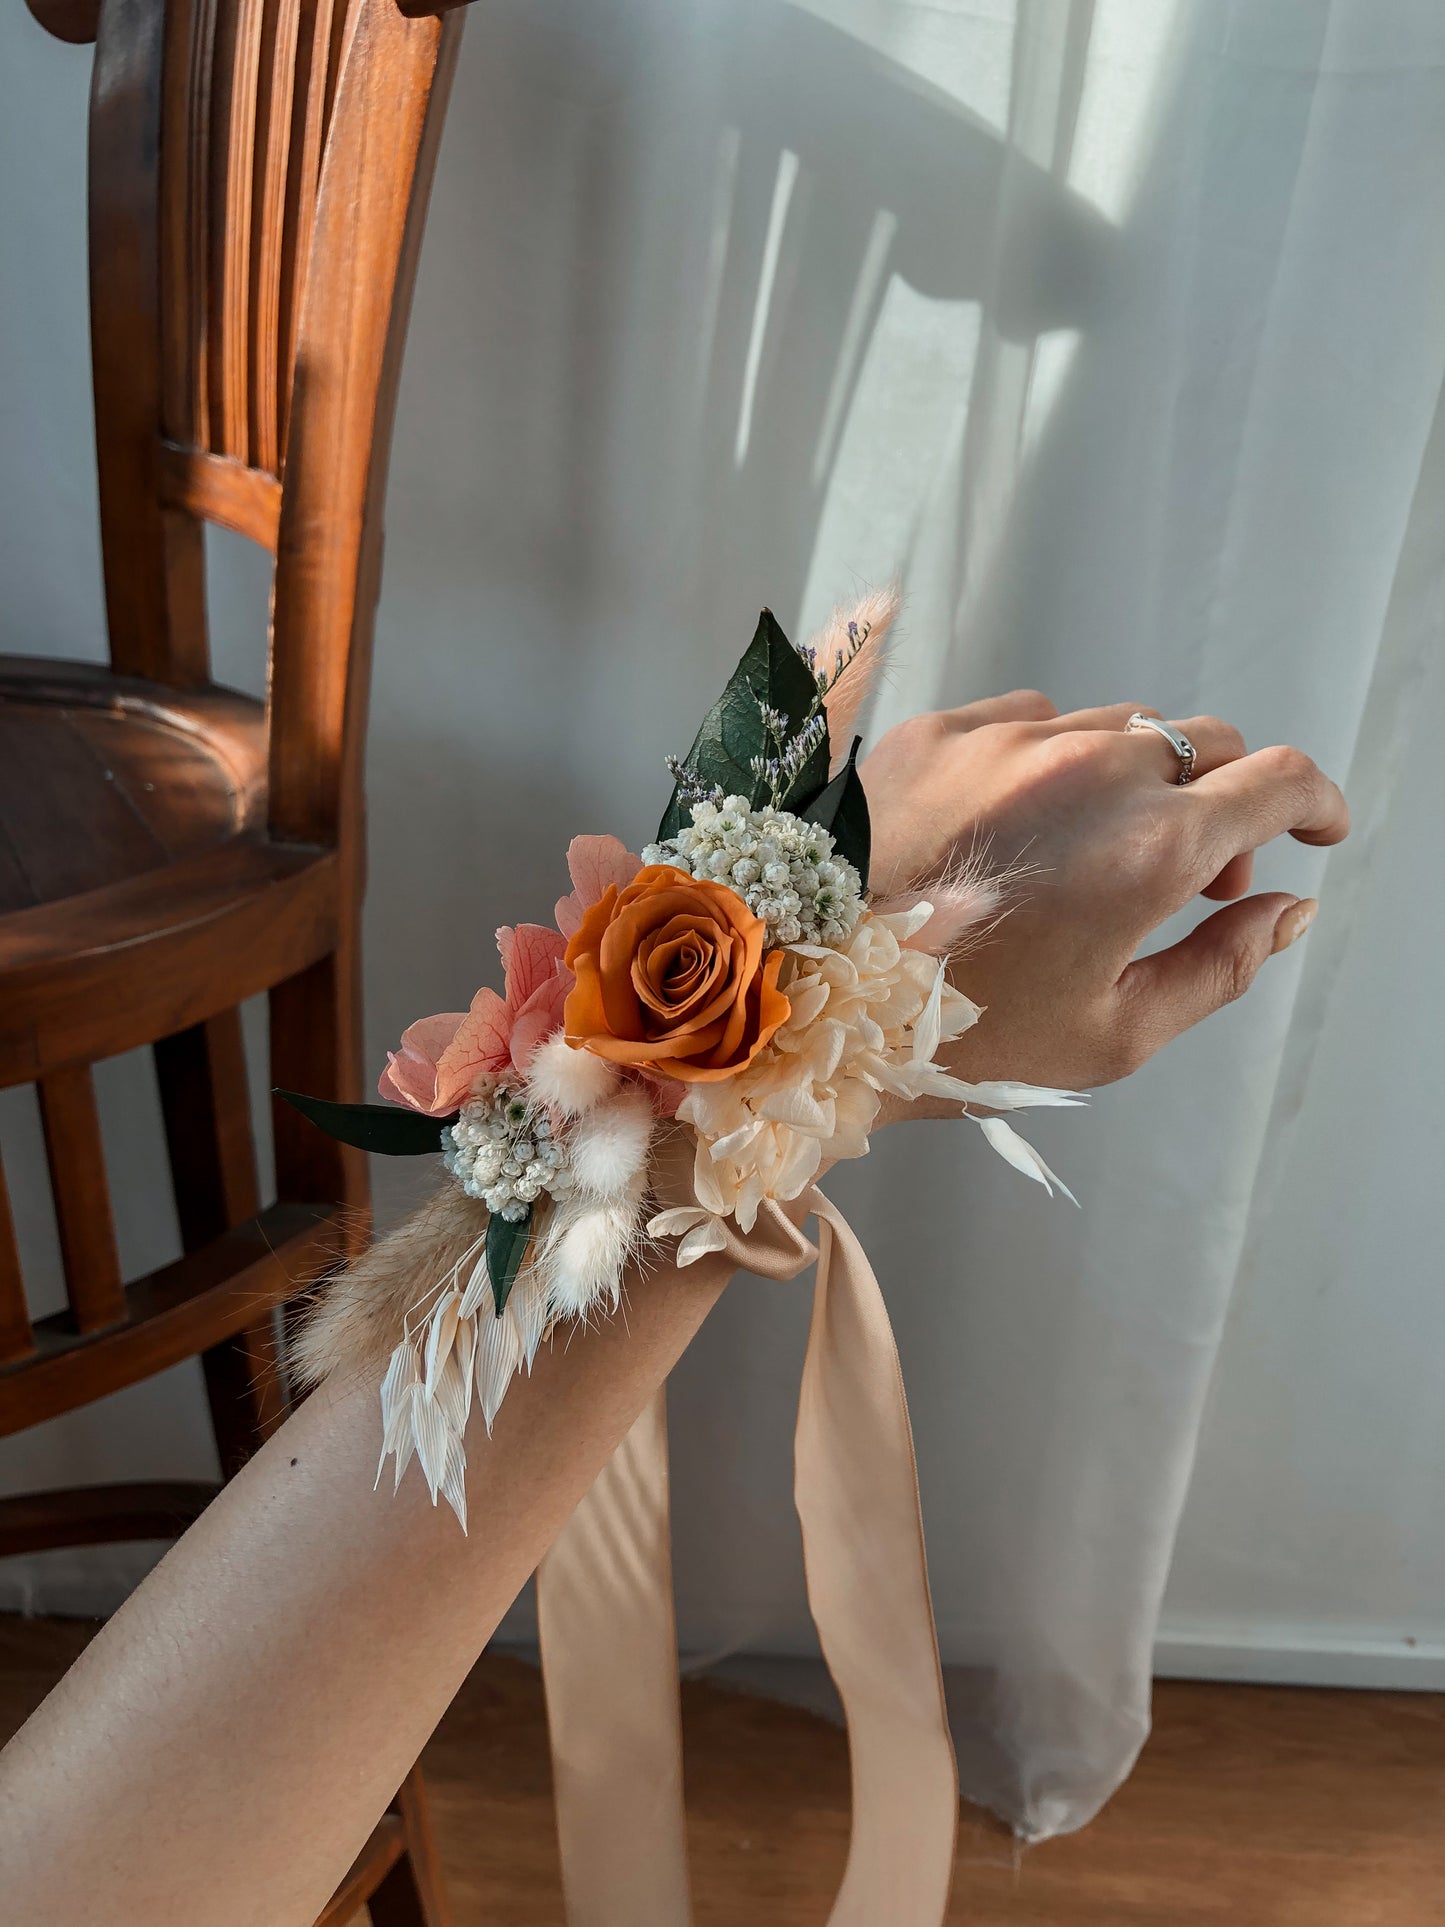 Add on: Preserved Wrist Corsages